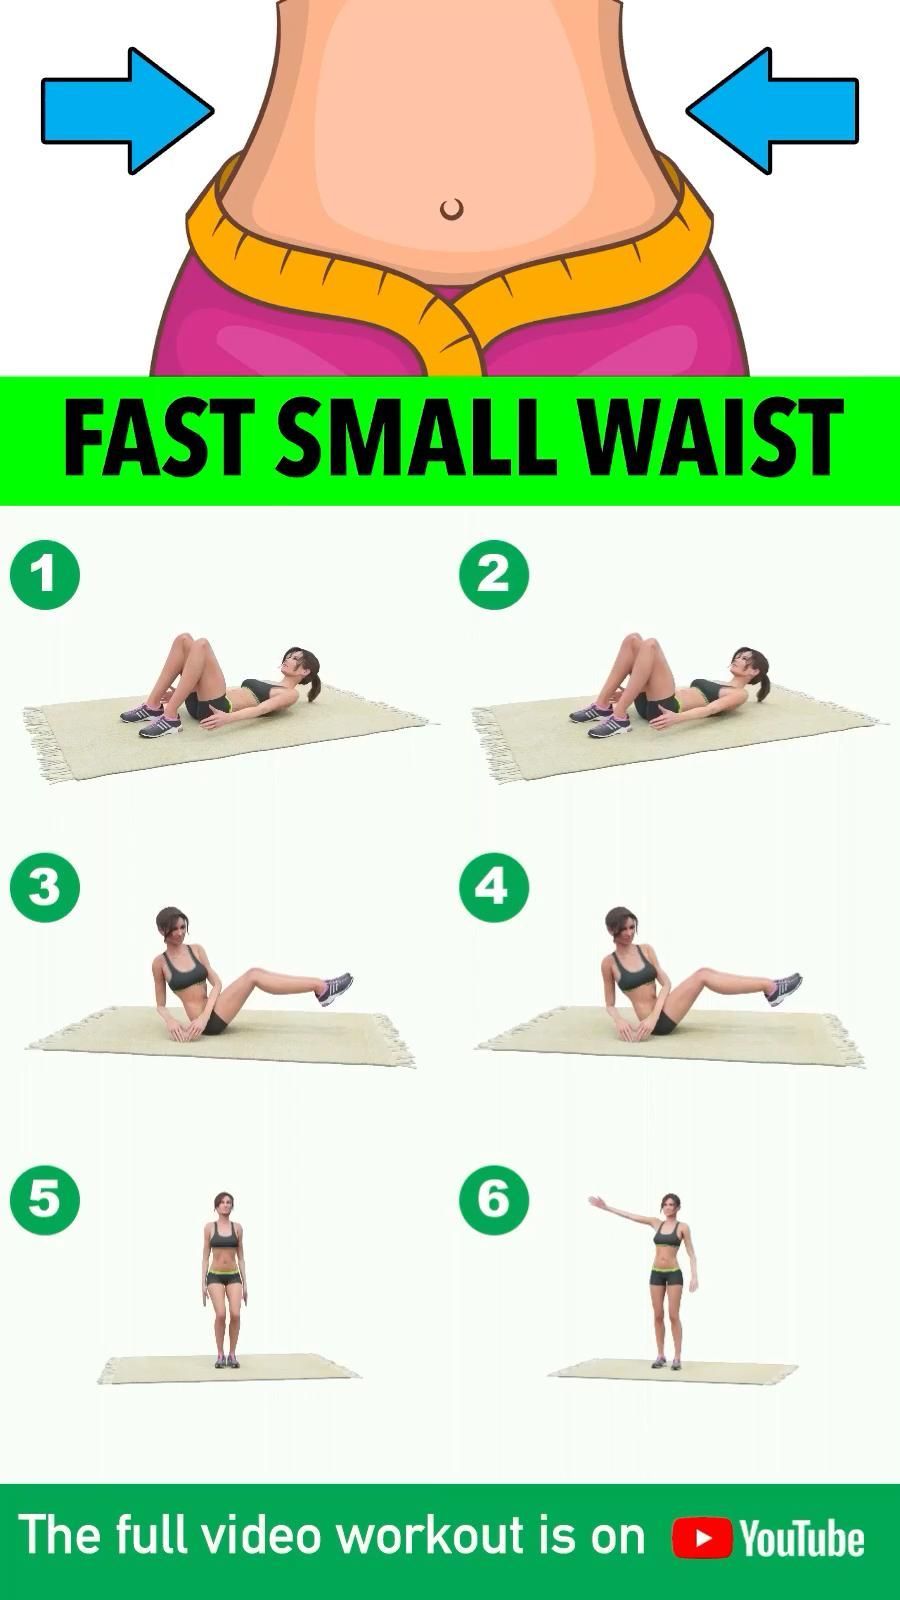 exercises to lose belly fat fast flat stomach and small waist at home -   19 workouts to lose belly fat fast ideas